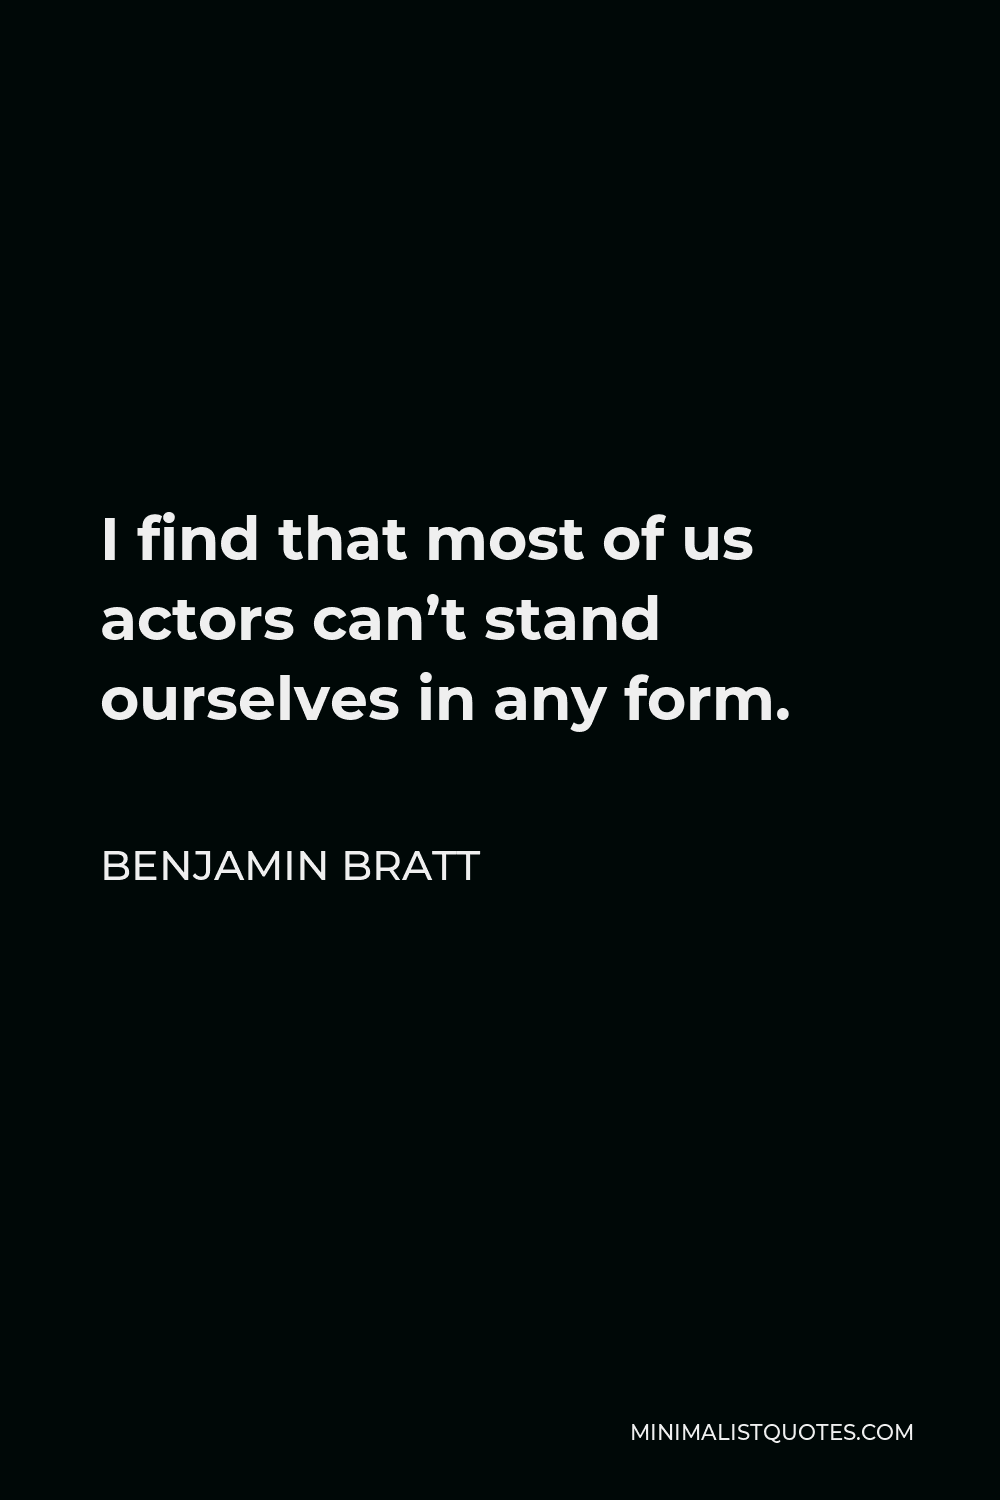 Benjamin Bratt Quote - I find that most of us actors can’t stand ourselves in any form.